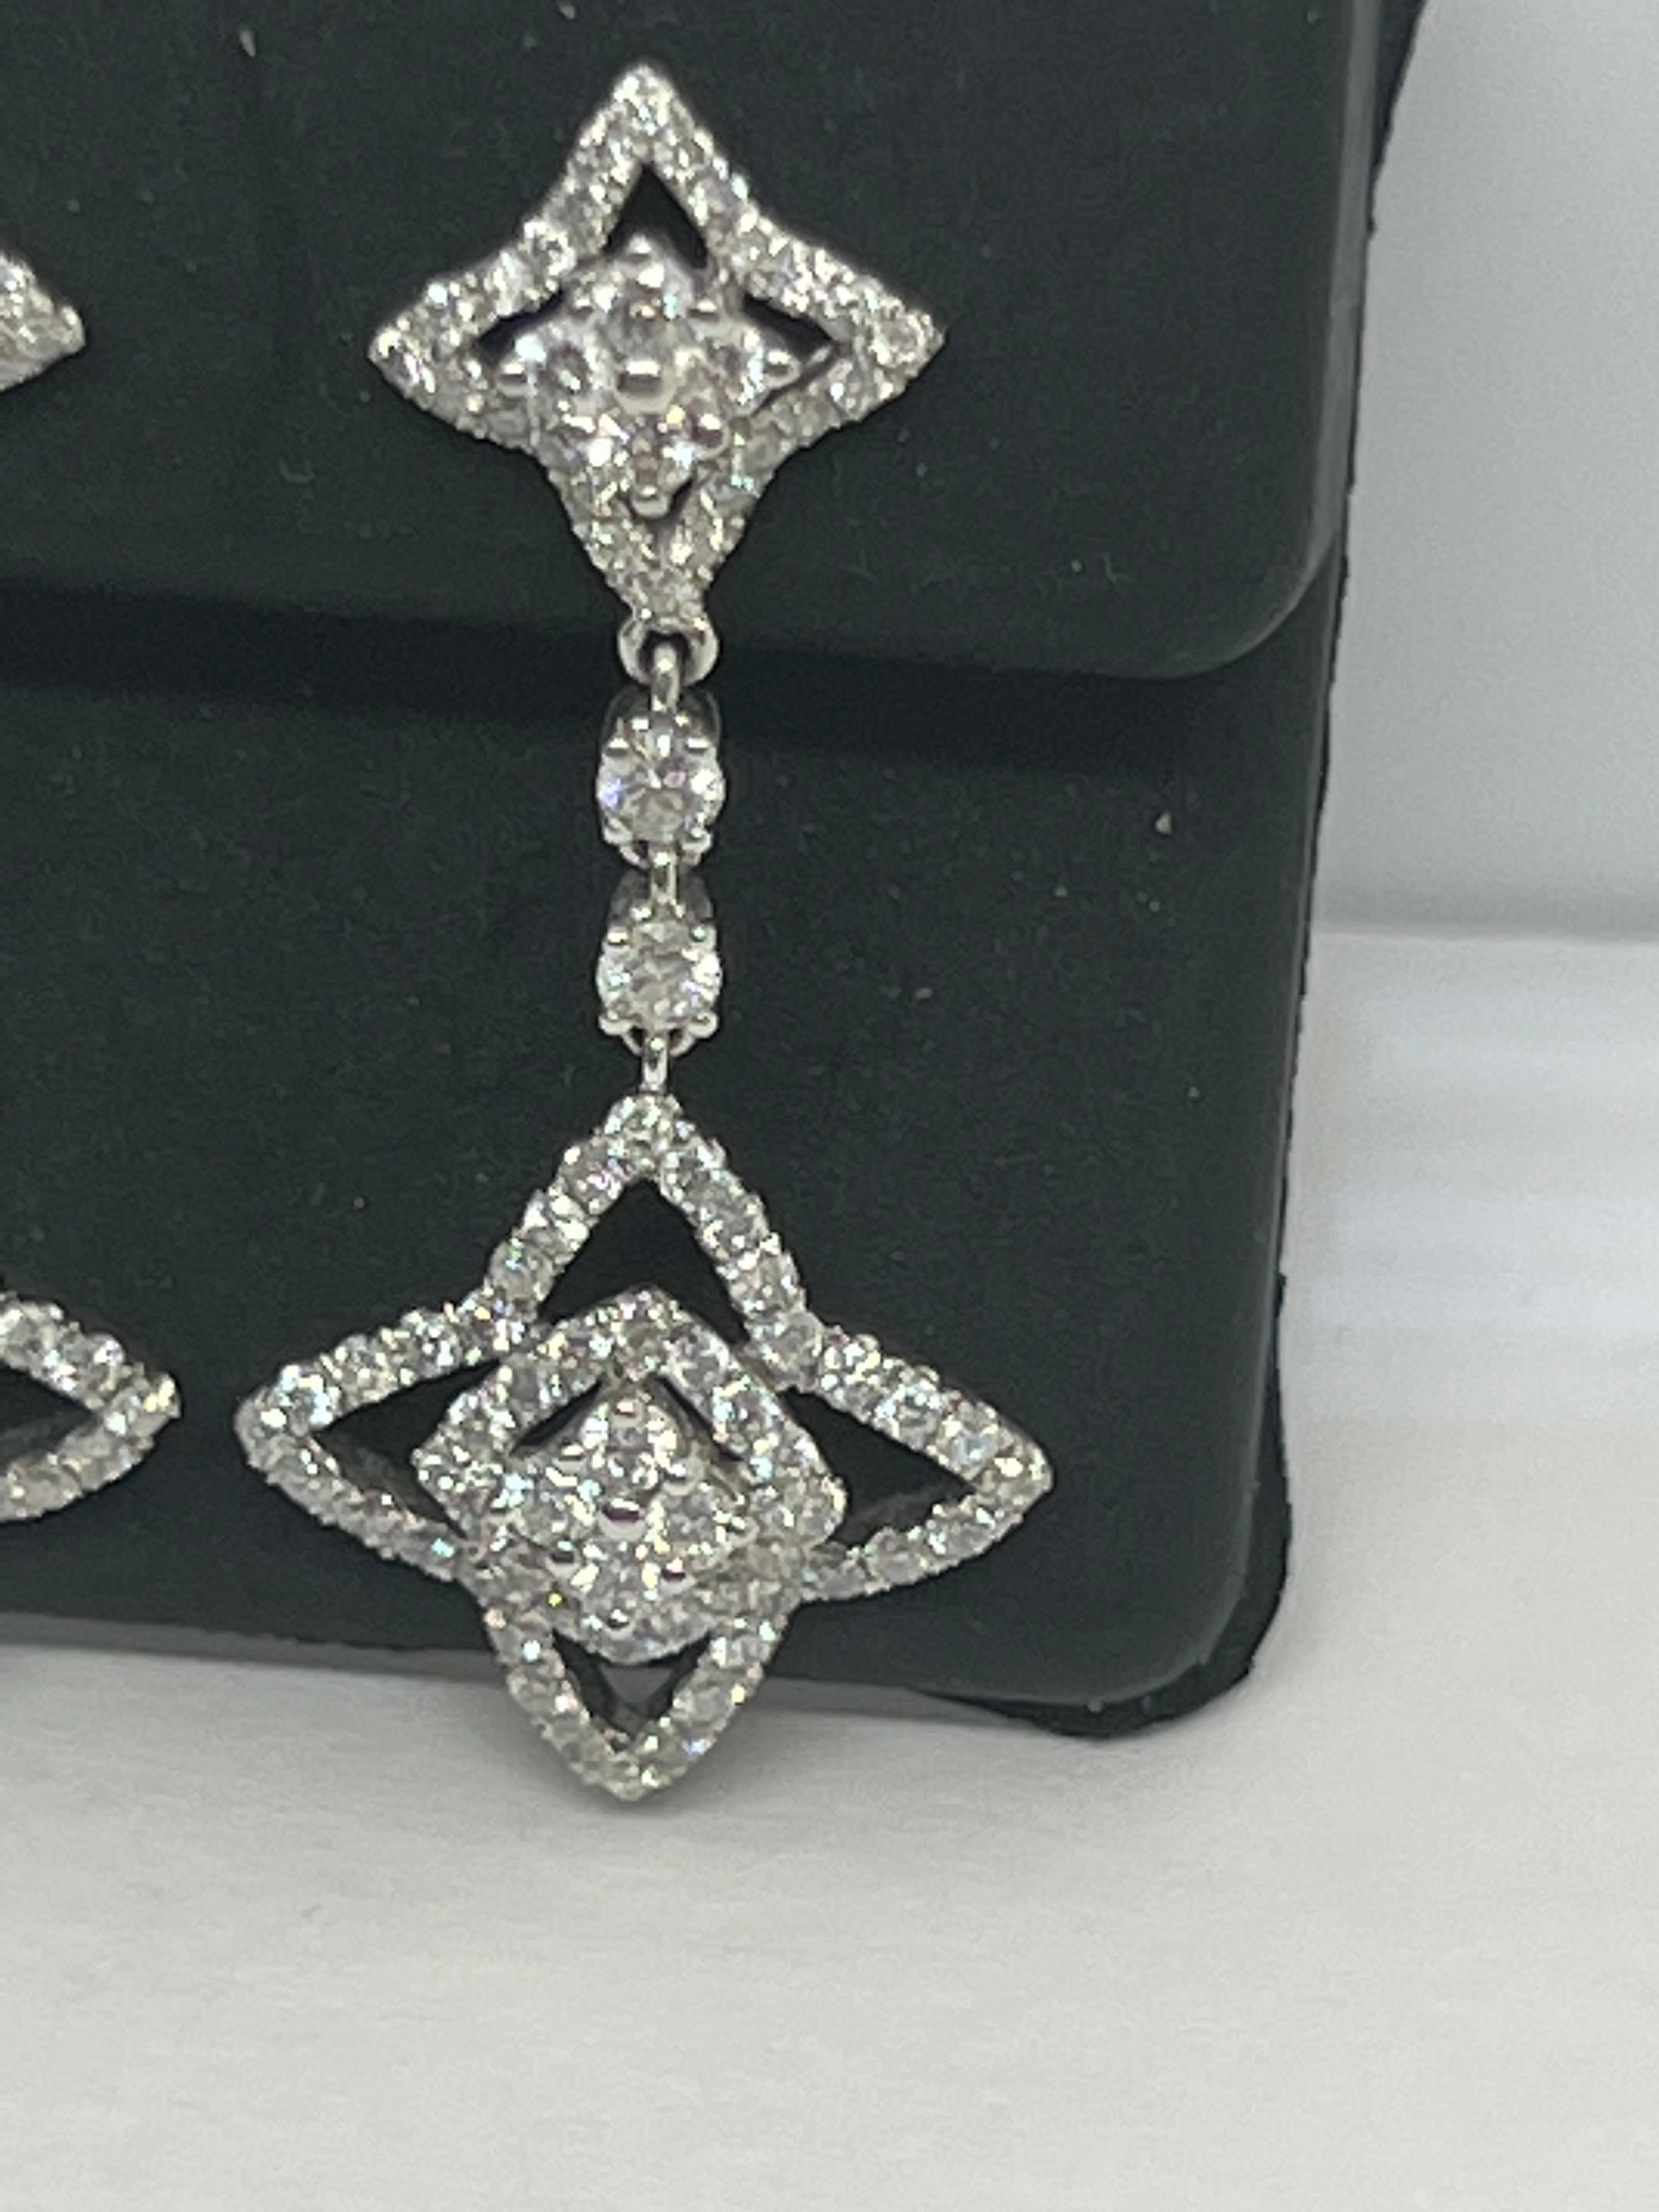 Add a touch of sparkle to your outfit with these stunning 14k white gold dangle drop earrings. The star-shaped design is adorned with natural round white diamonds that glisten in the light, making them perfect for any special occasion. The pavé